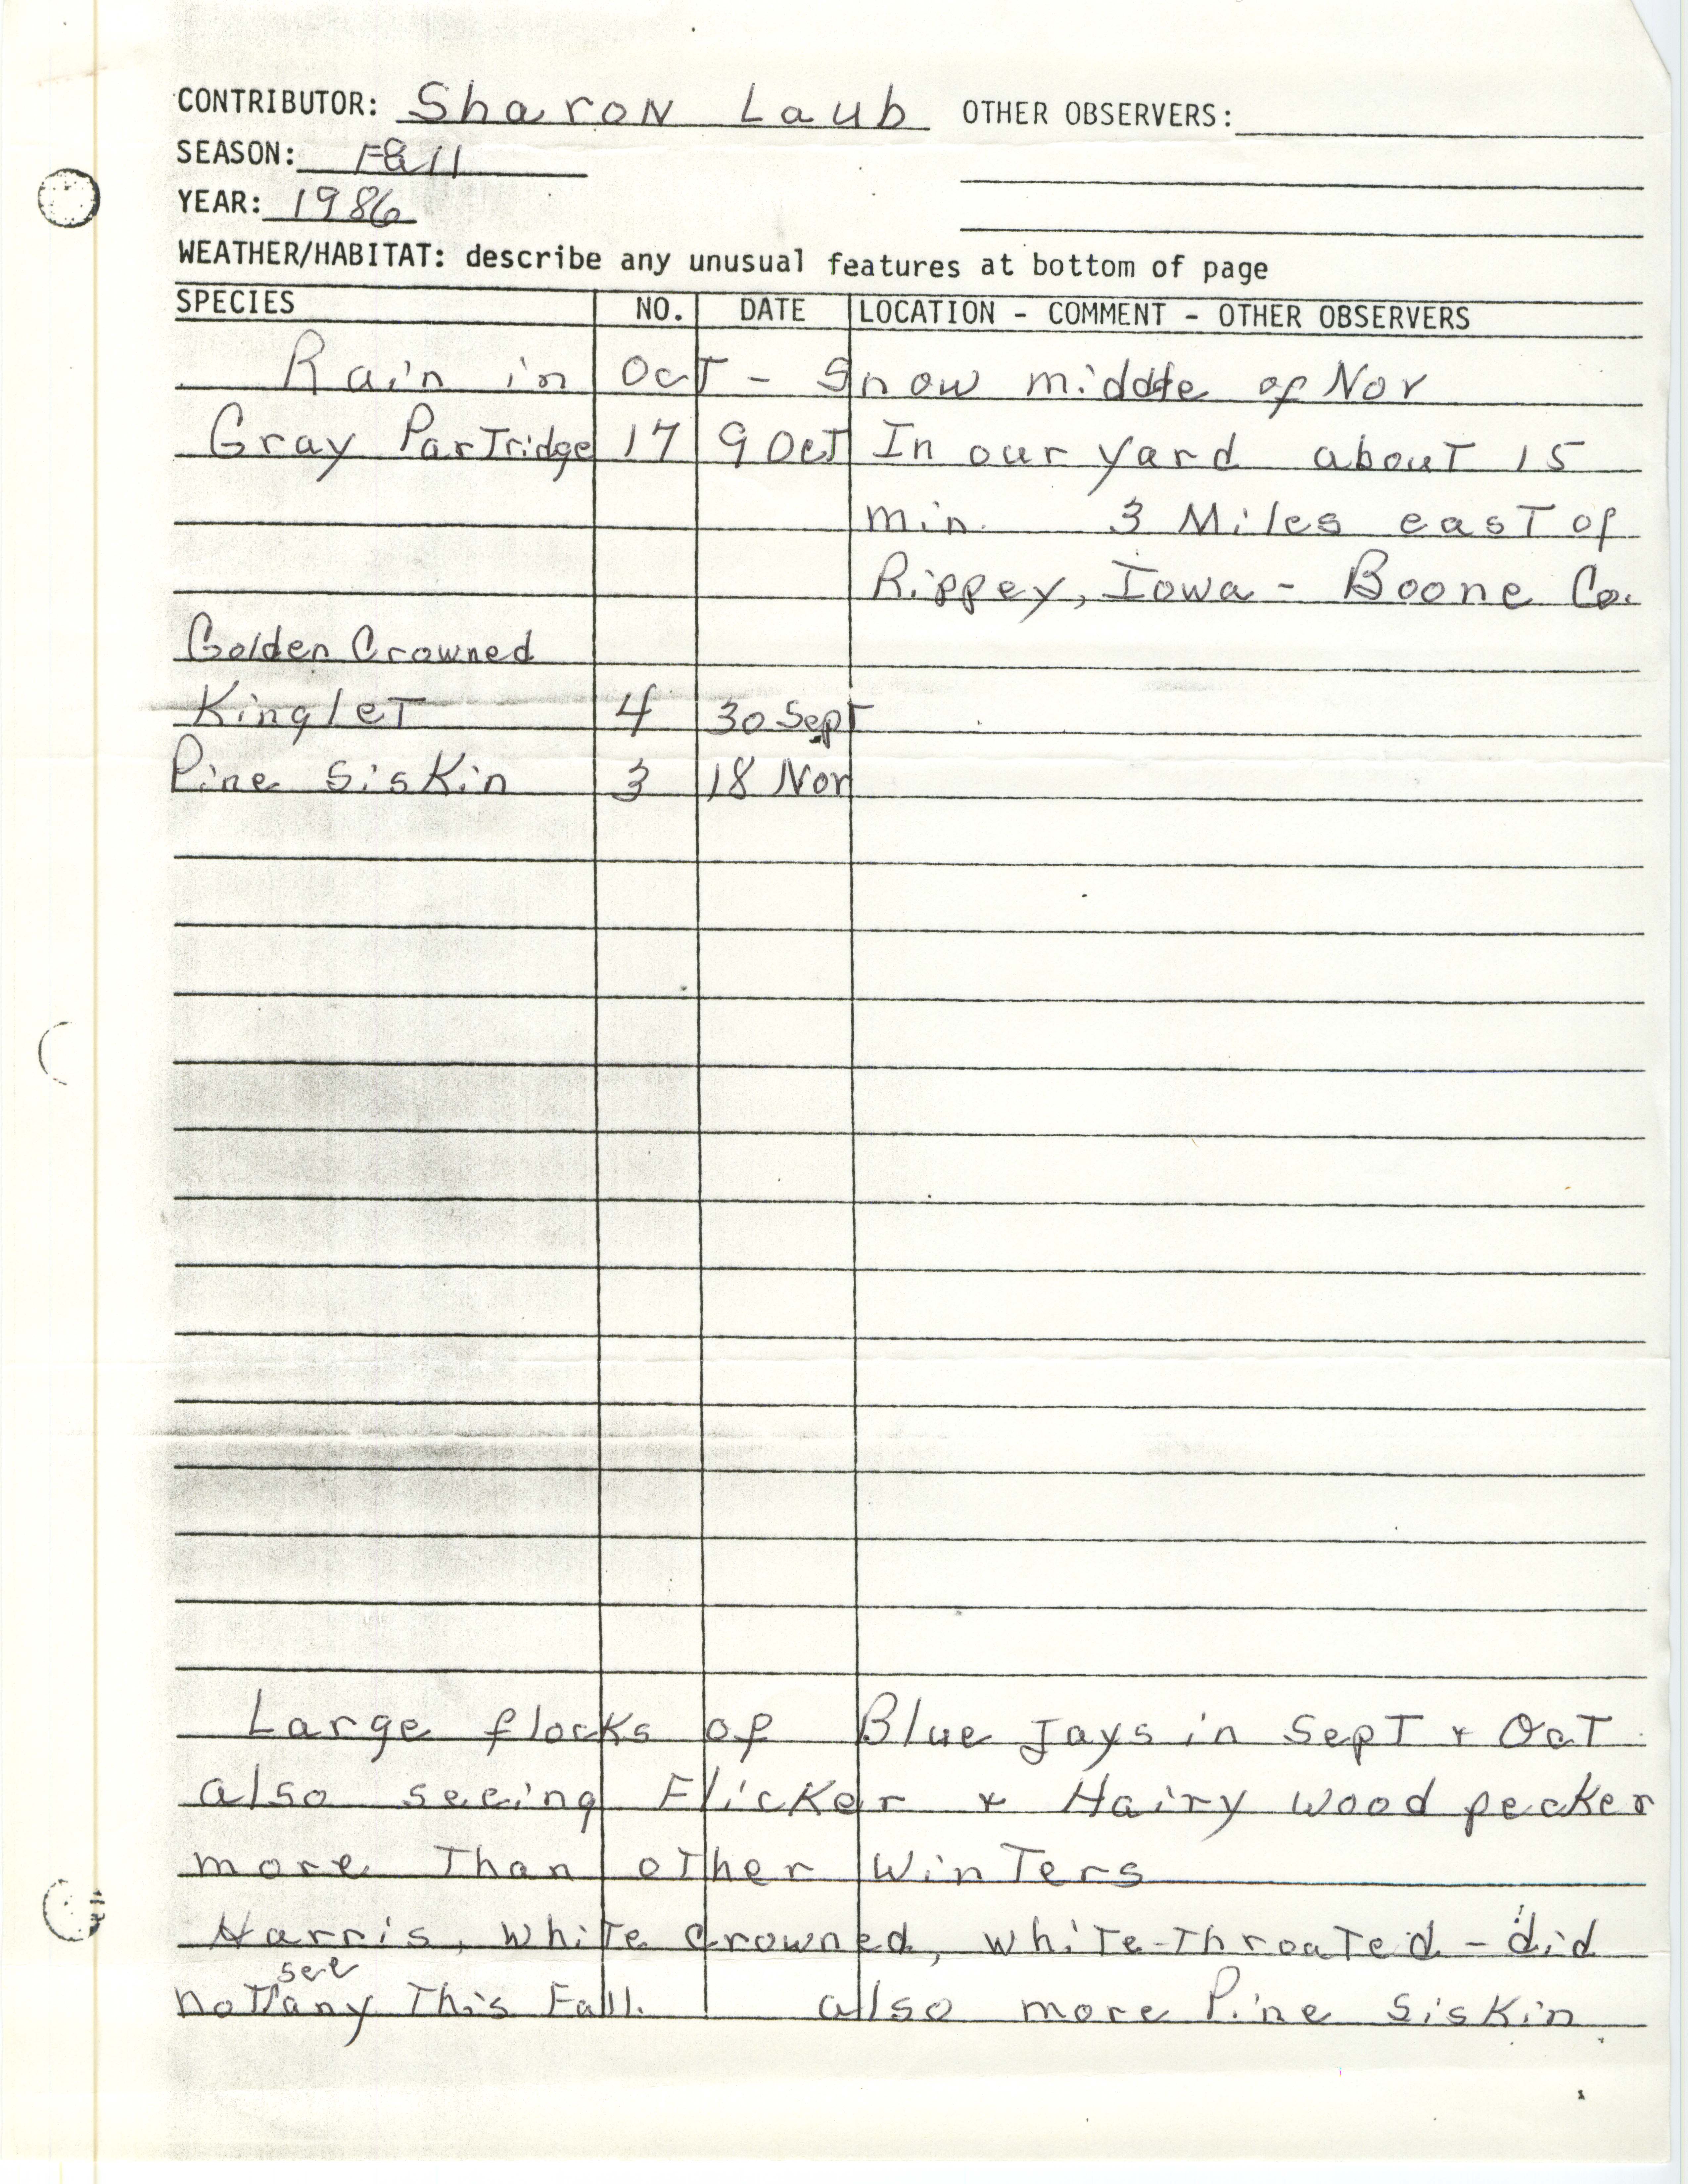 Field notes contributed by Sharon Laub, fall 1986